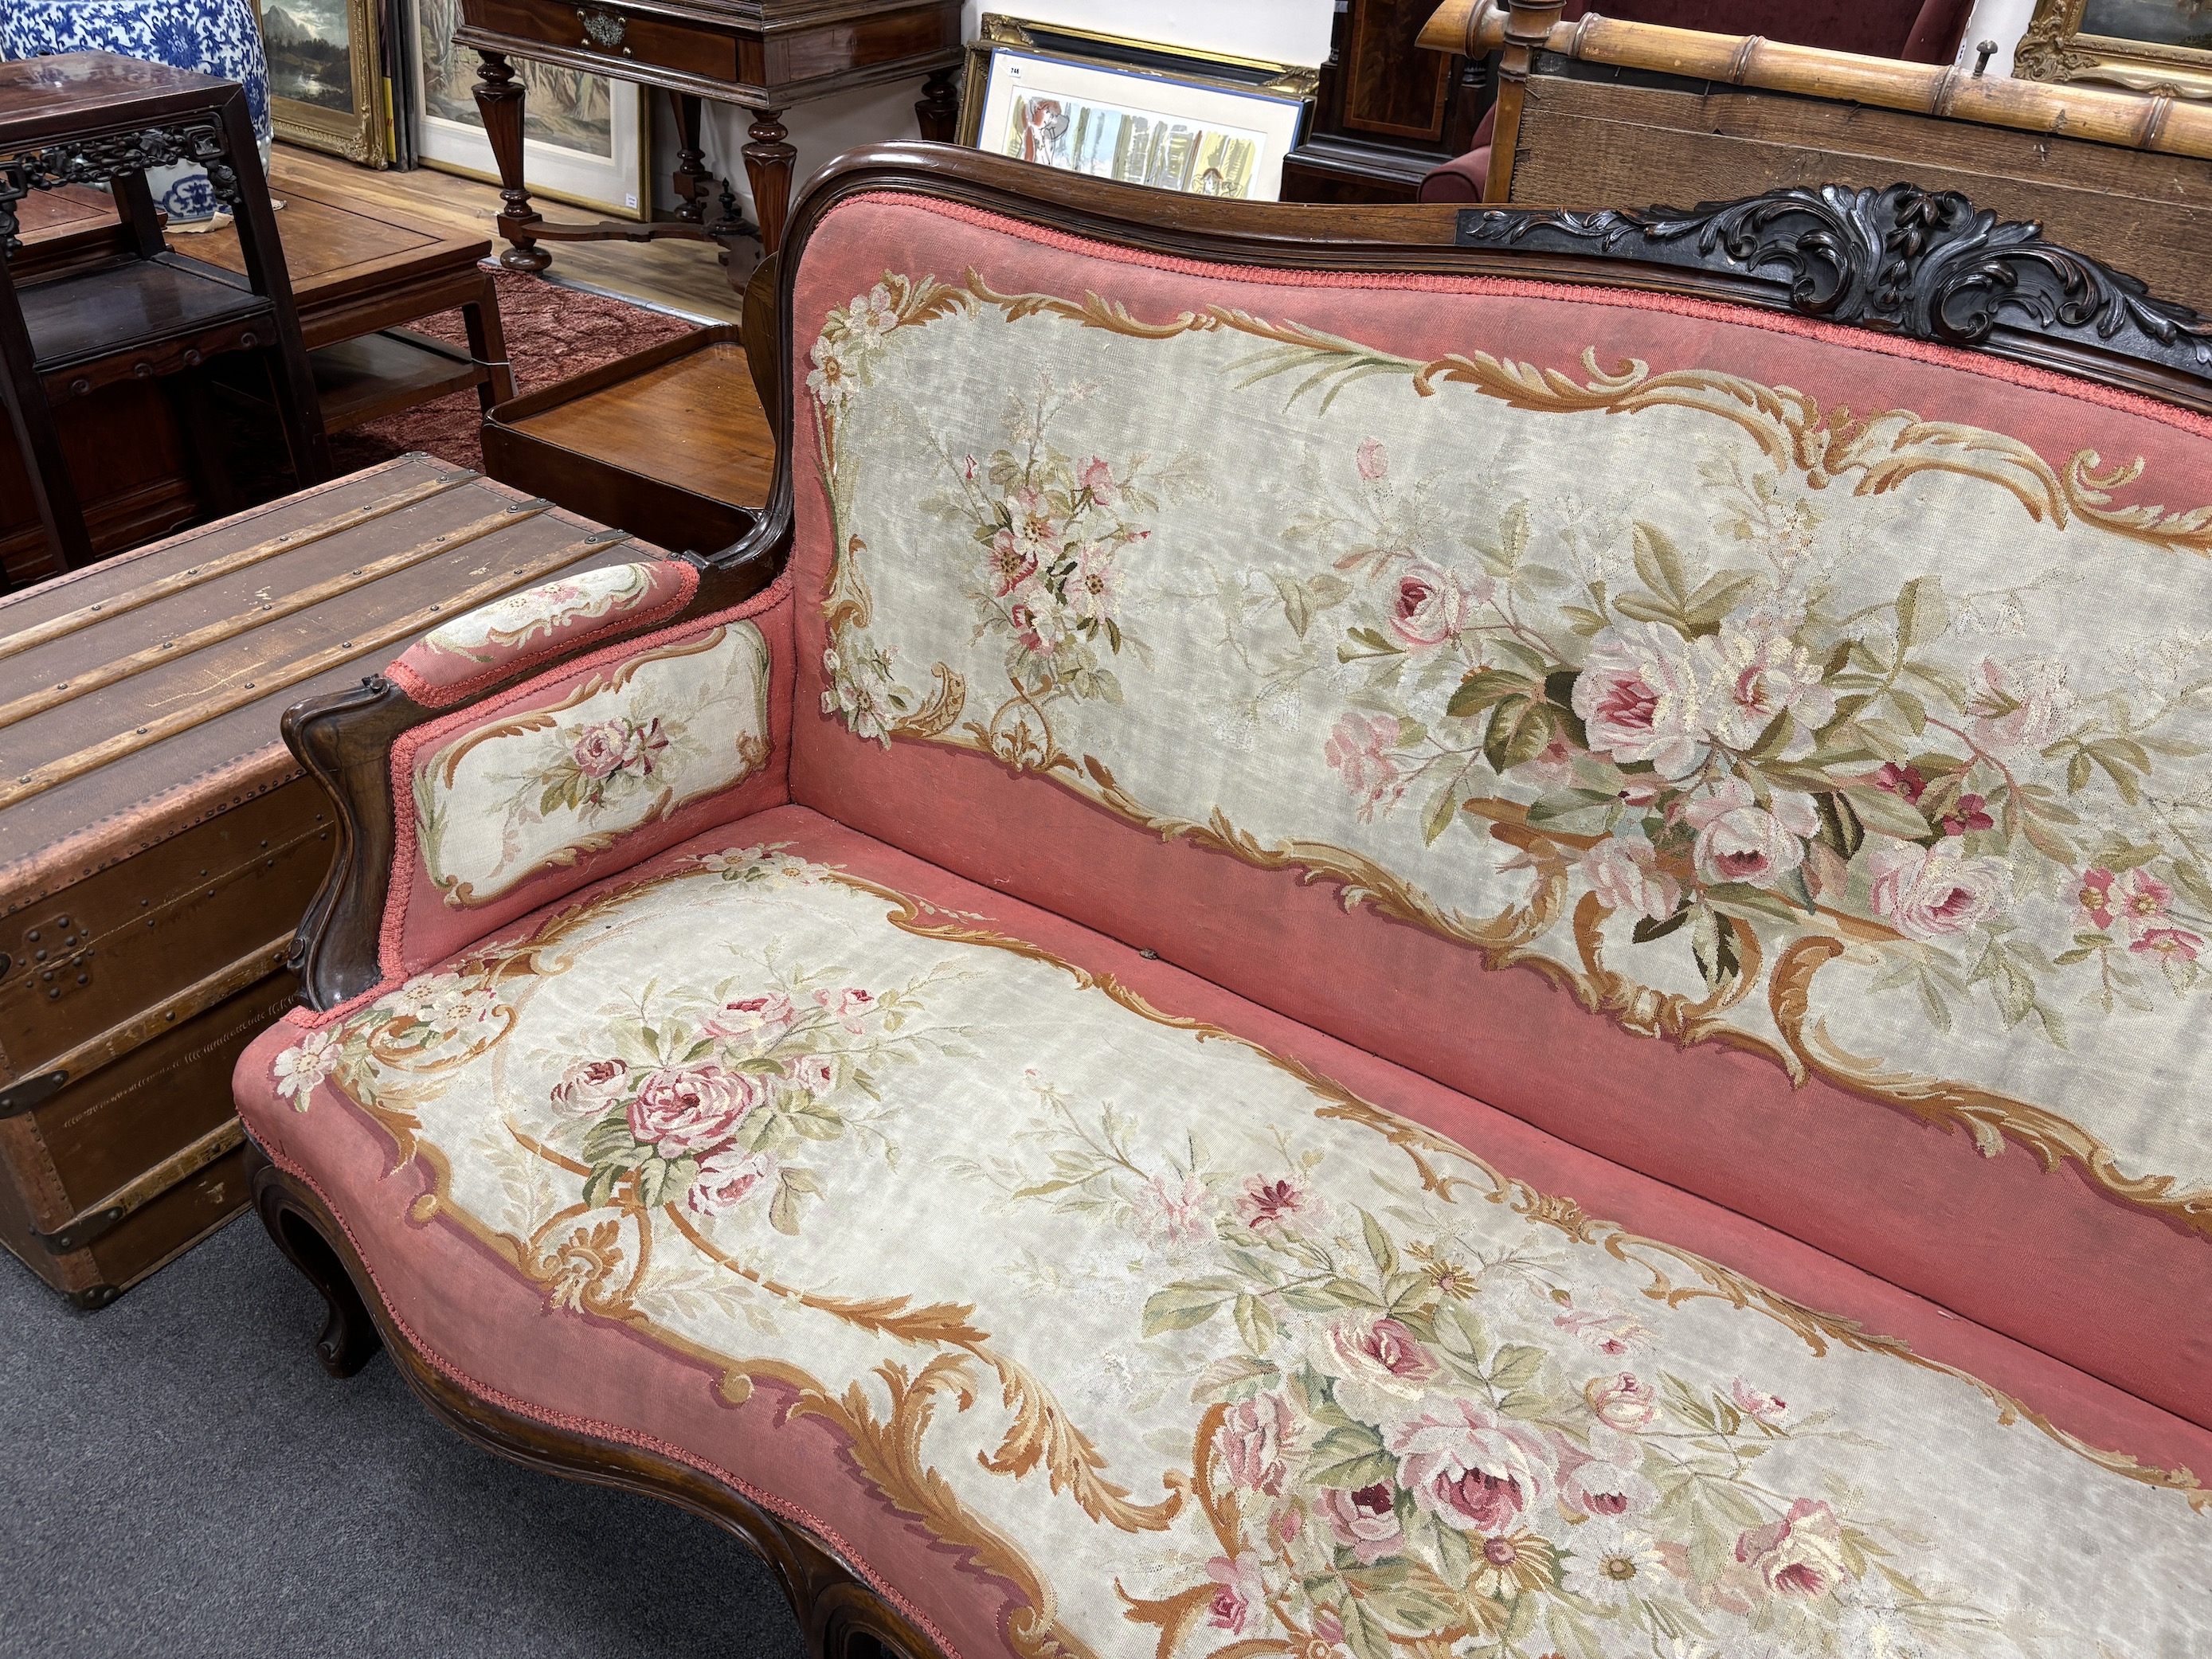 A 19th century French rosewood settee with floral needlepoint upholstery, width 198cm, depth 66cm, height 108cm